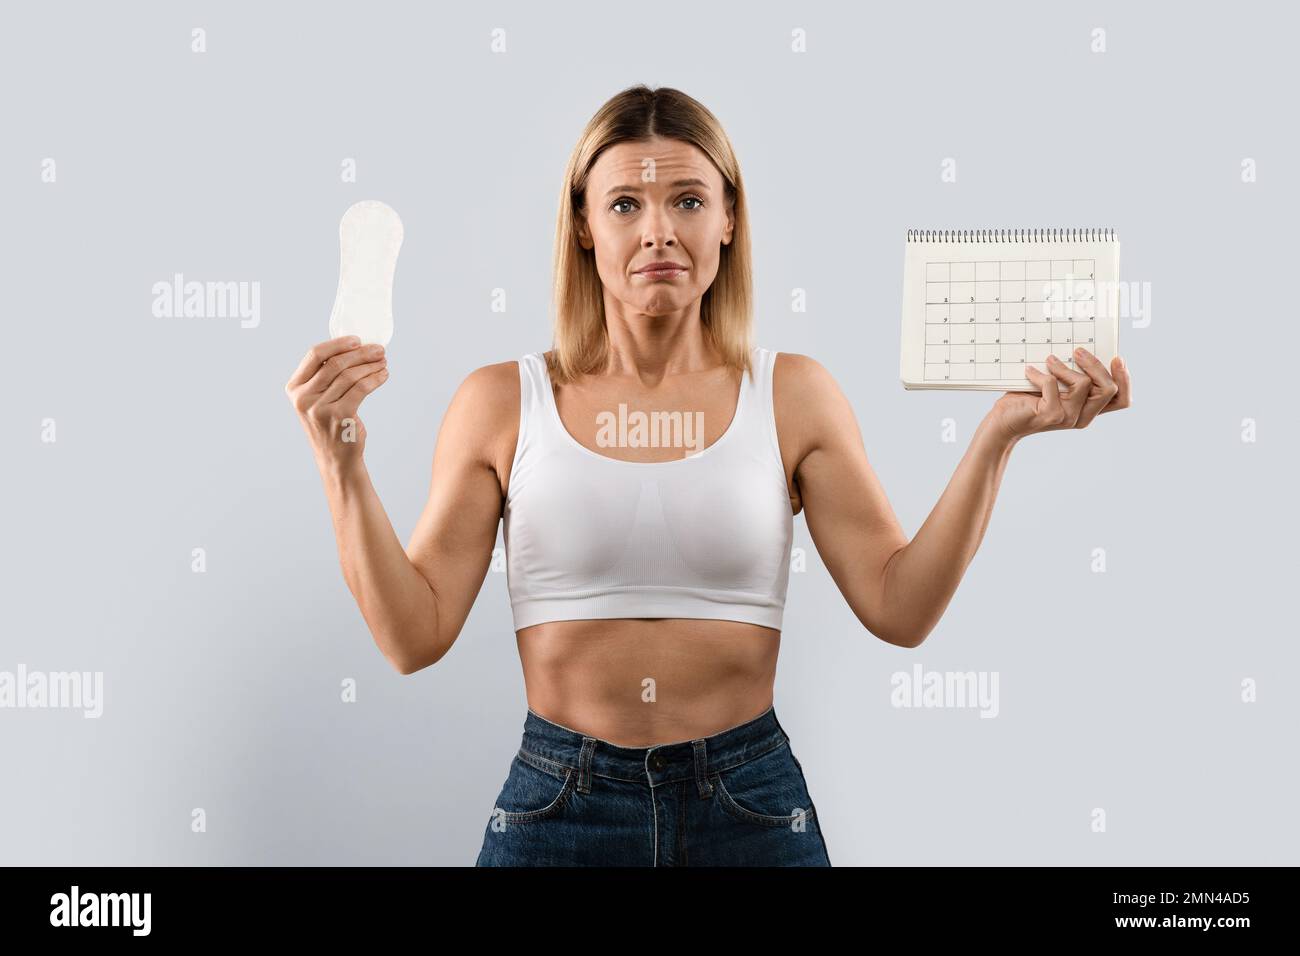 Unhappy middle aged woman demonstrates periods calendar and sanitary napkin Stock Photo